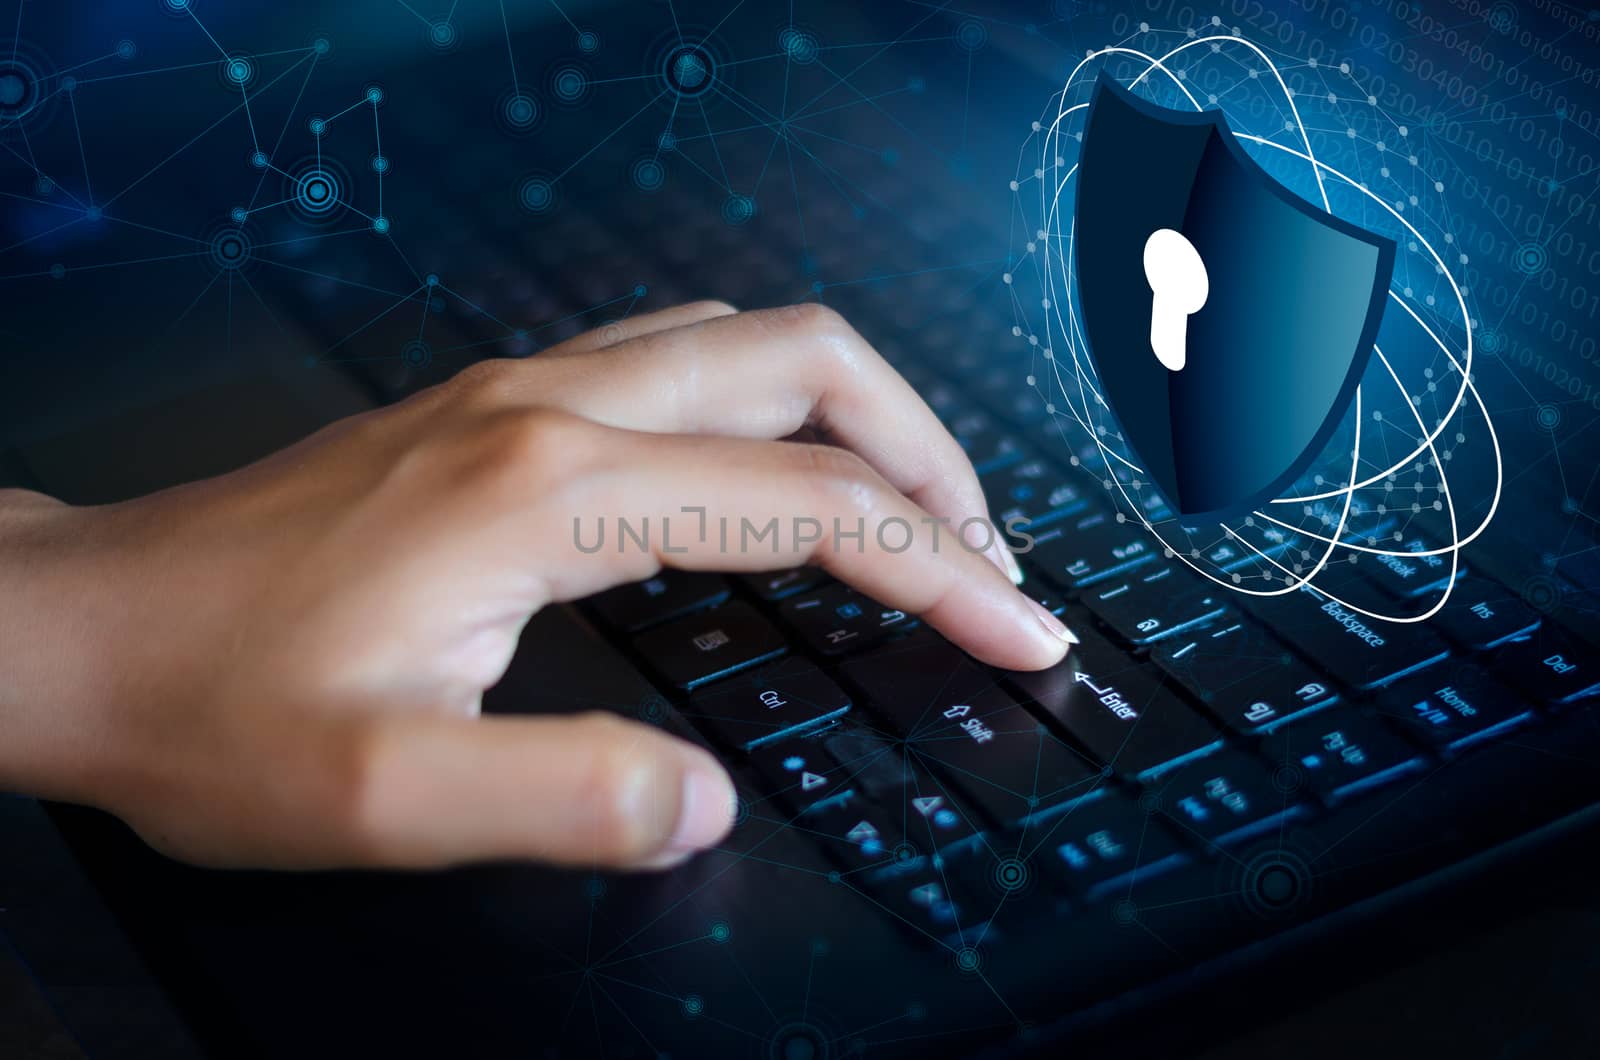 Press enter button on the keyboard computer Shield cyber Key lock security system abstract technology world digital link cyber security on hi tech Dark blue background, Enter password to log in. lock finger Keyboard by sarayut_thaneerat